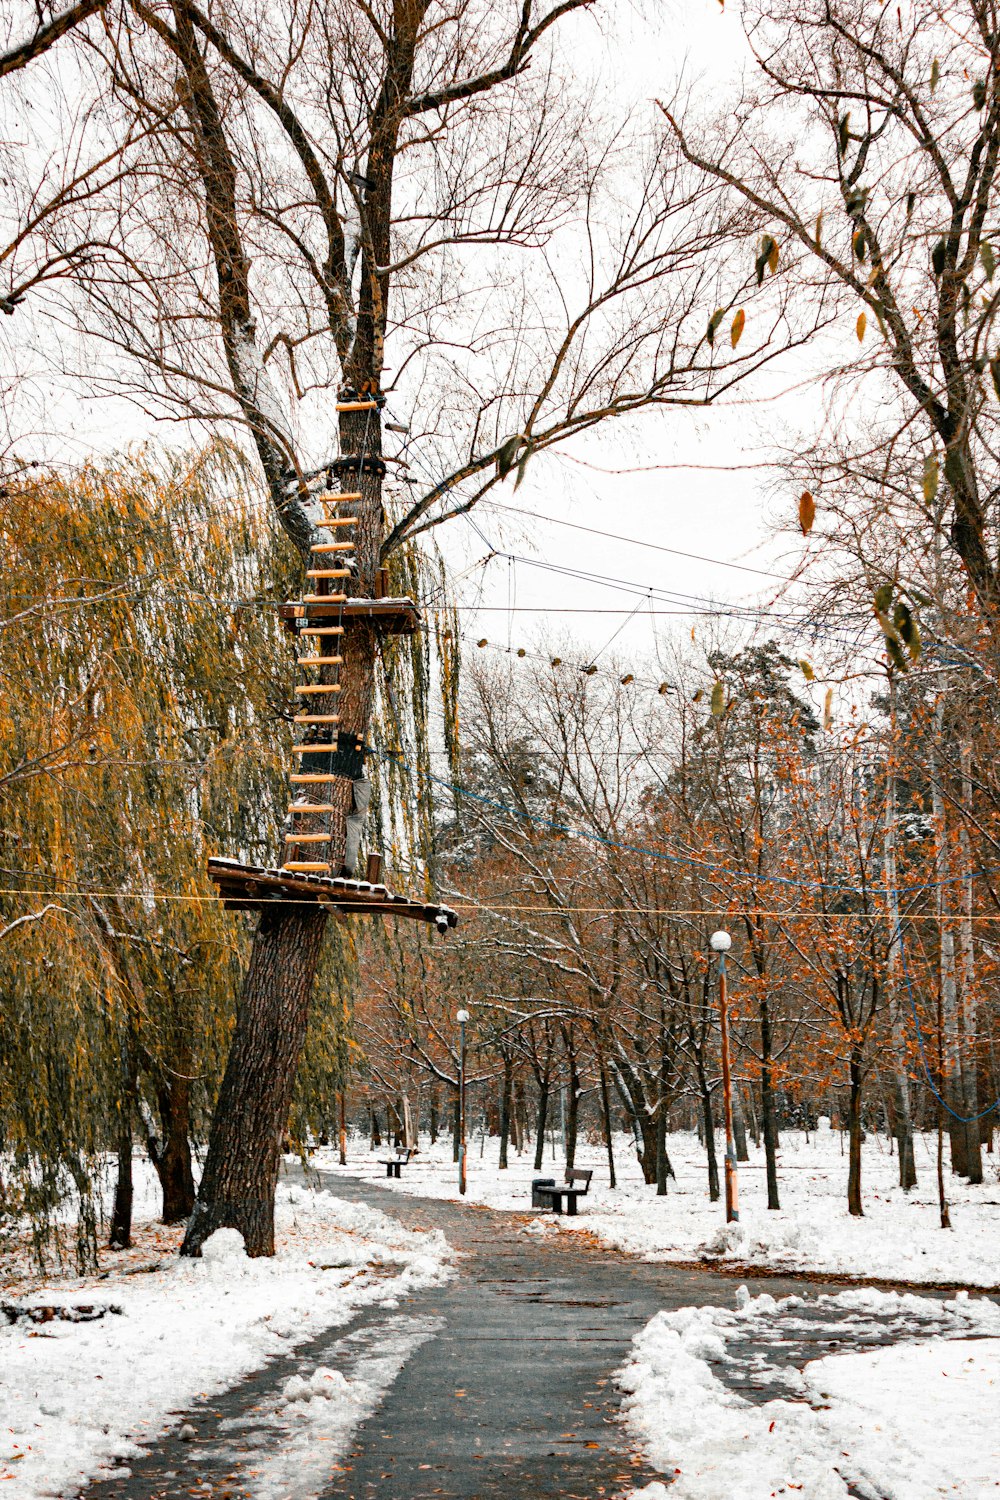 a tree house in the middle of a snowy park